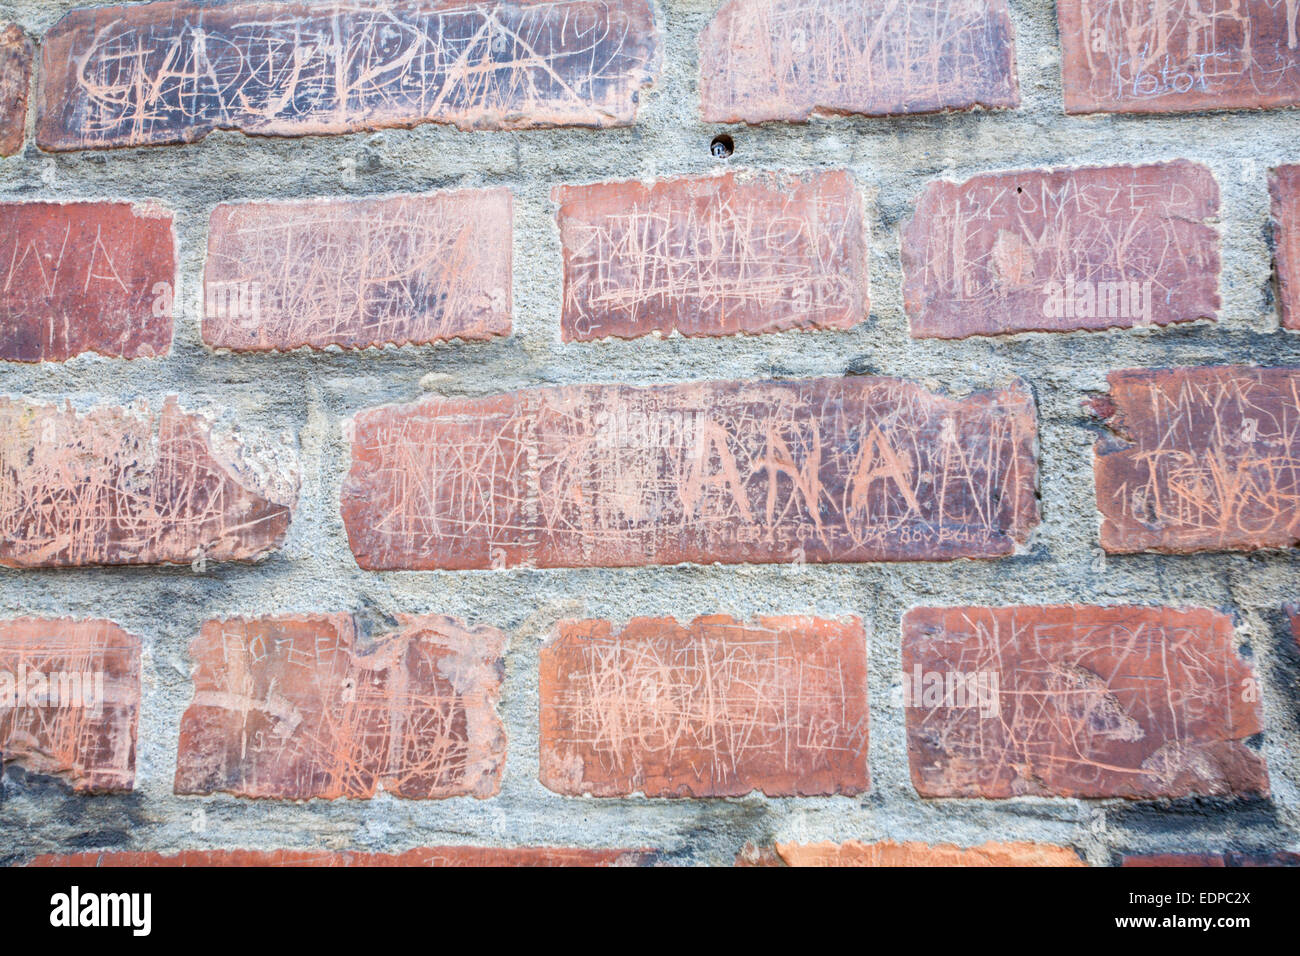 Names scratched on brick wall at the Auschwitz concentration camp, Auschwitz, Poland Stock Photo